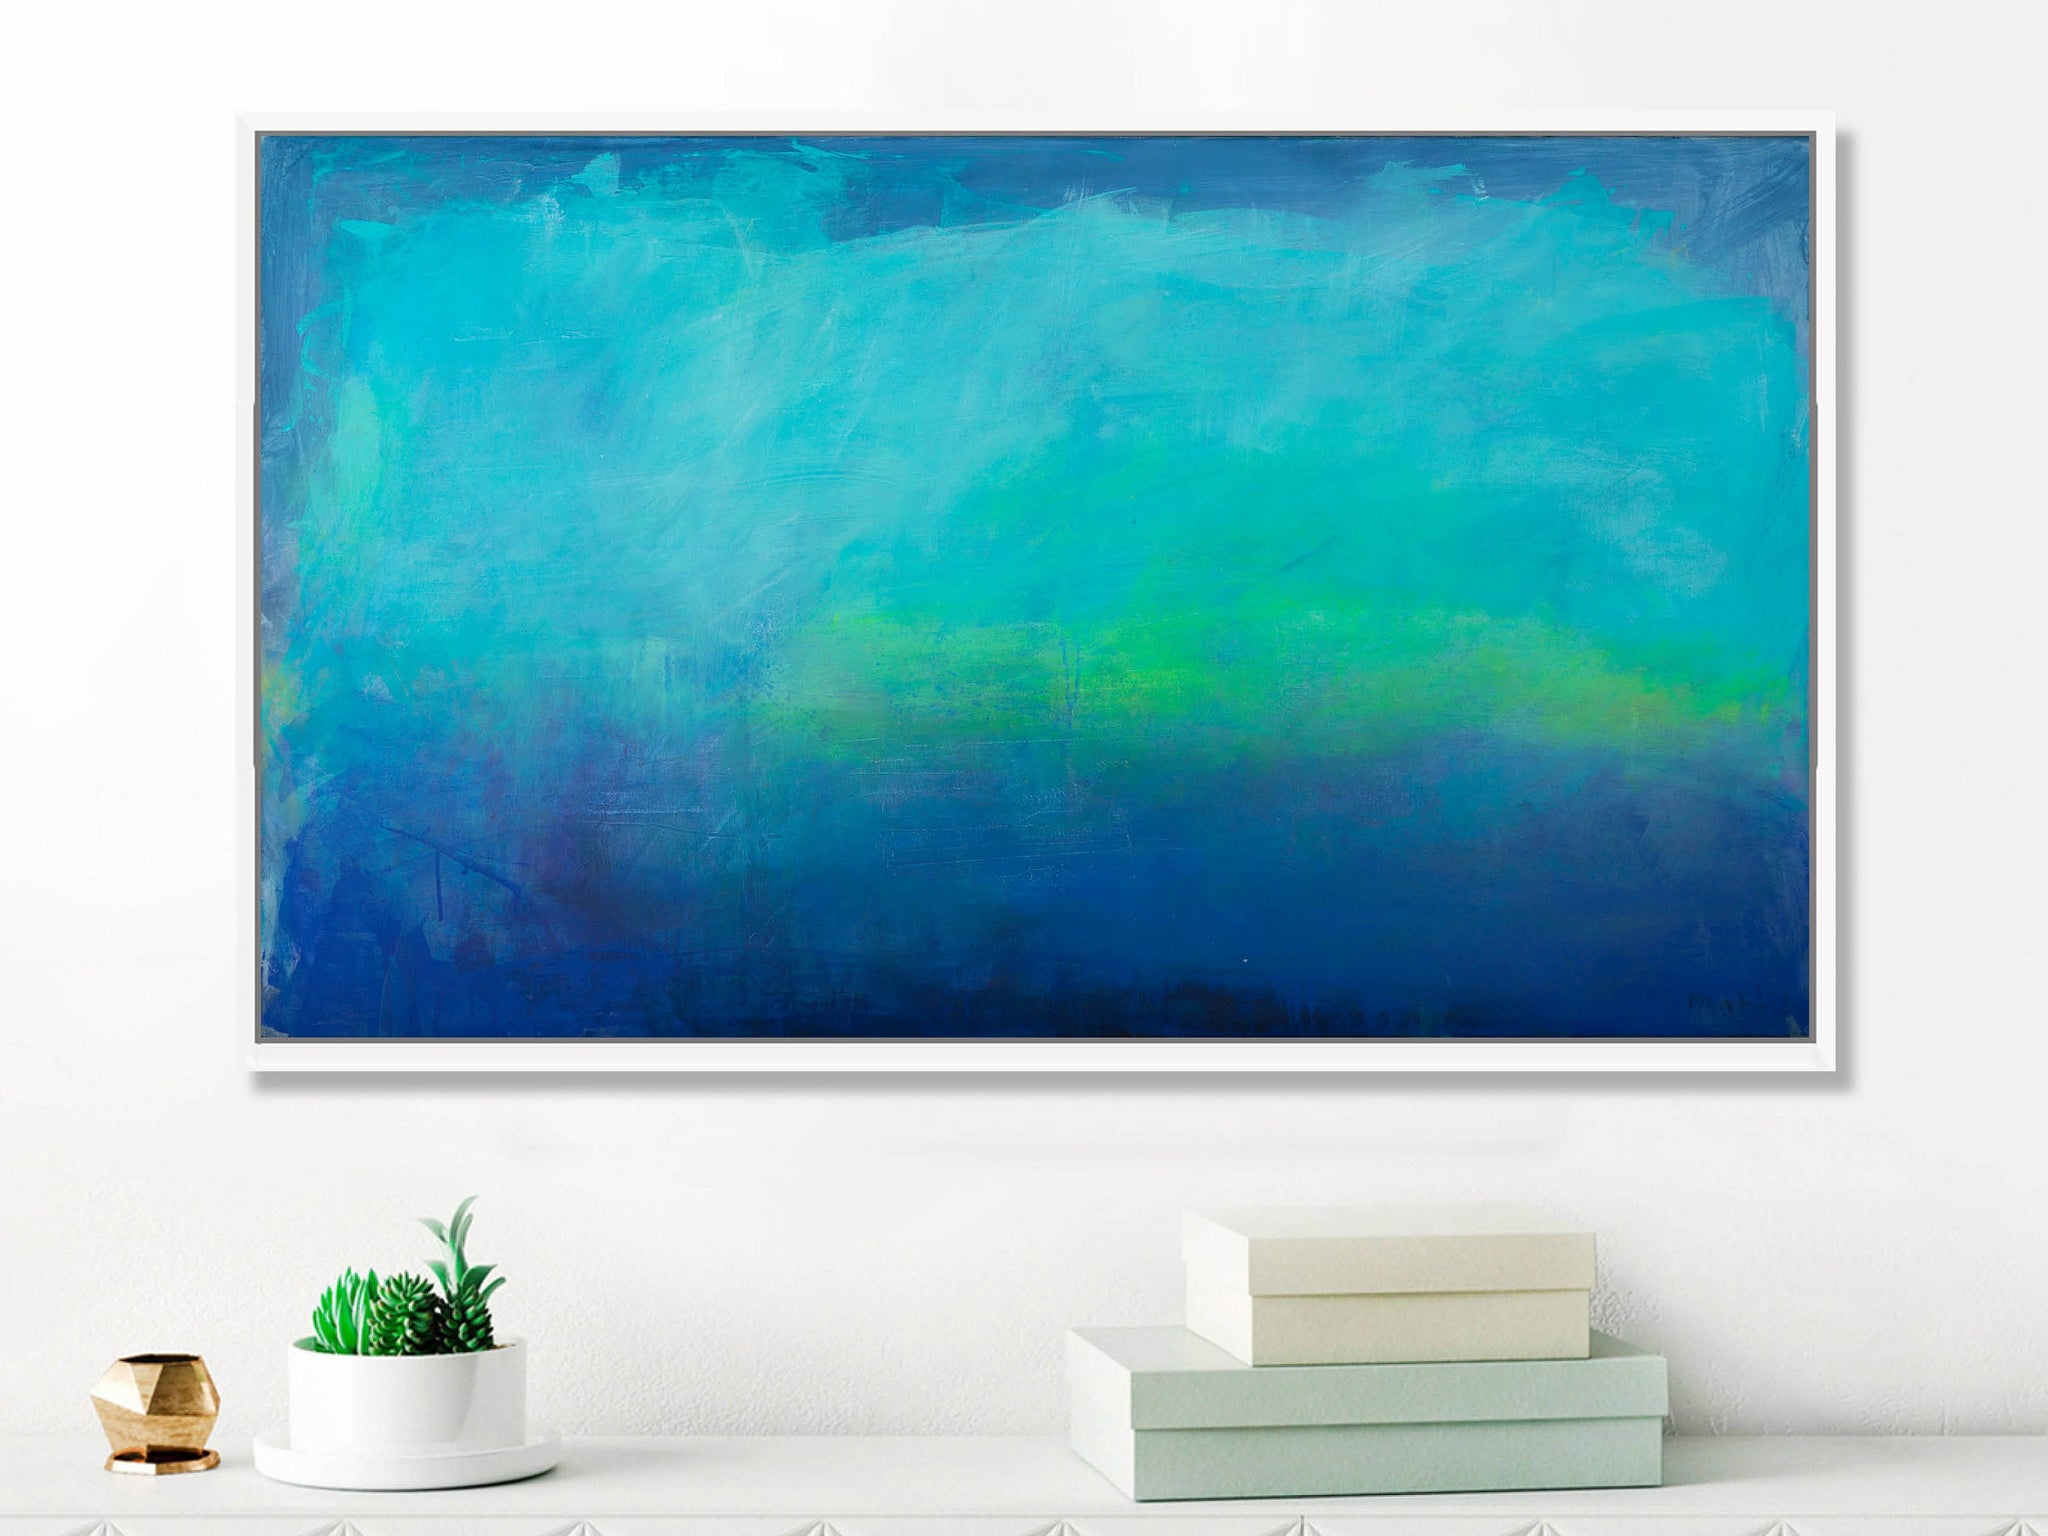 Turquoise large abstract wall art, Blue and Green abstract painting, wall decor gift, above bed decor wall art - camilomattis.com